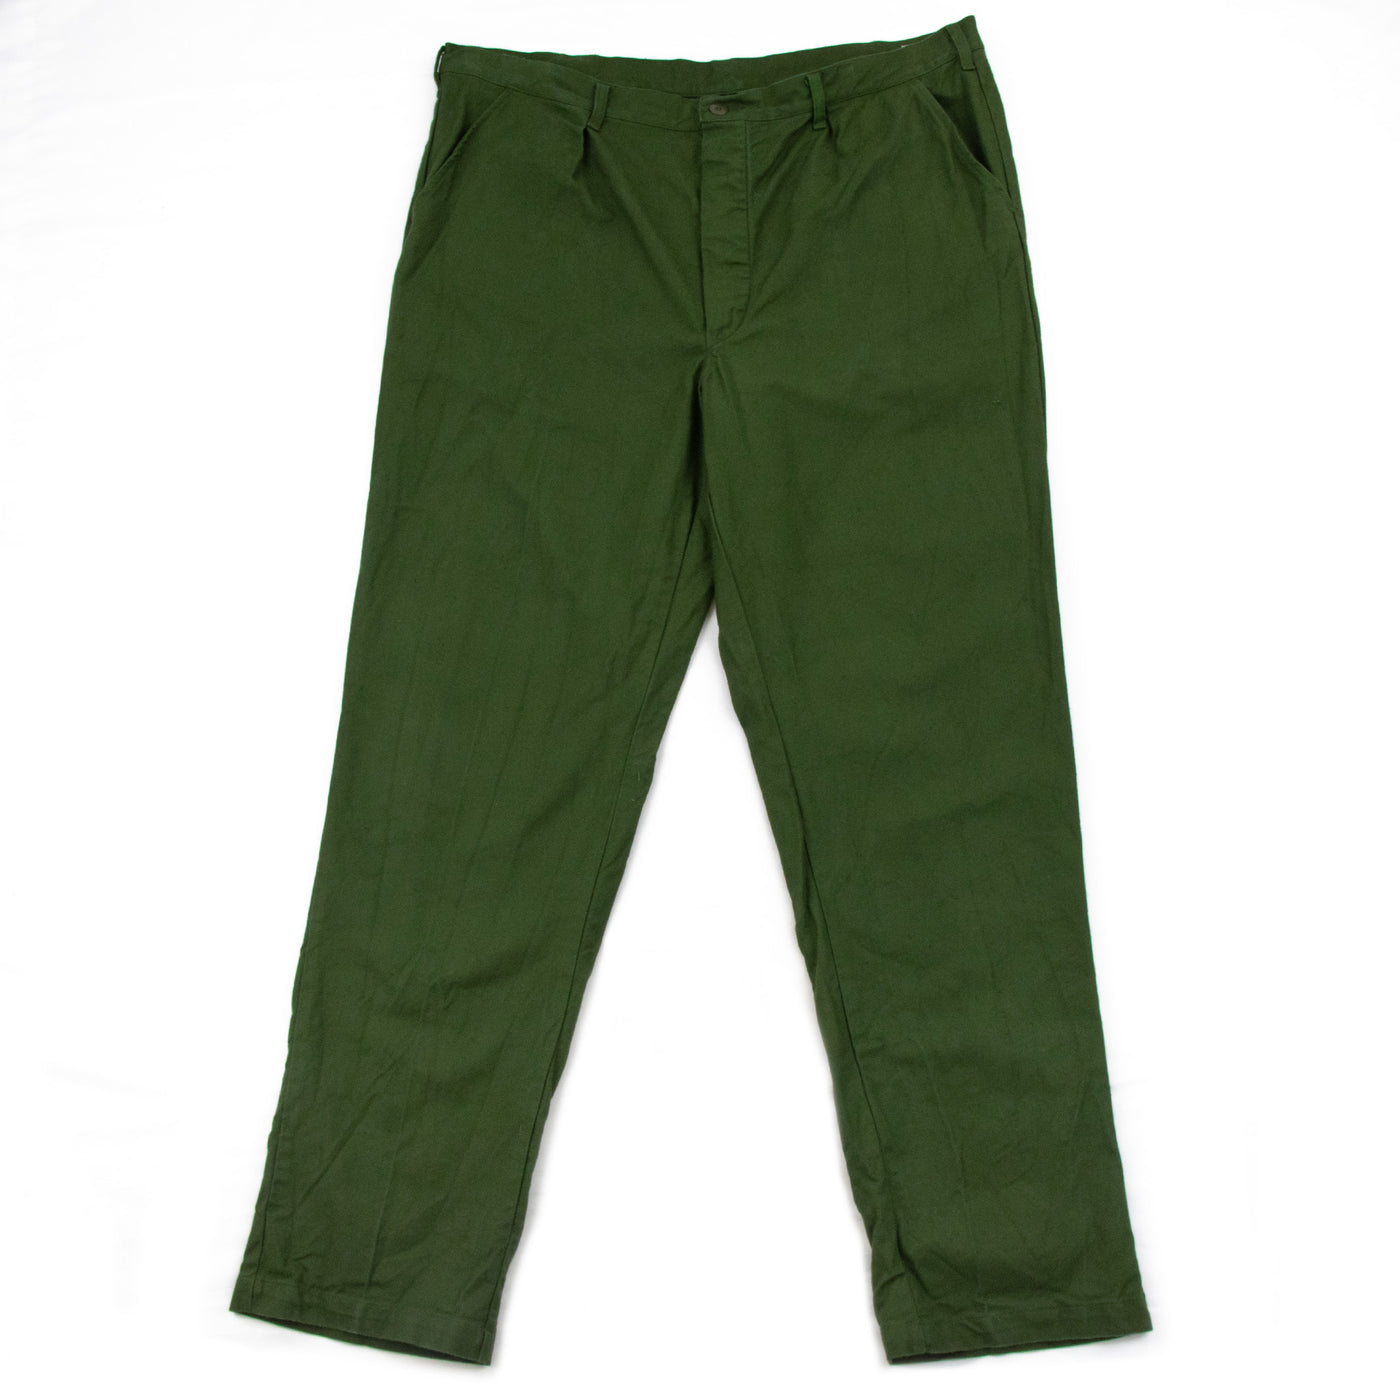 Vintage 1970s Vintage Swedish Army Utility Work Pants Green - 40 Front